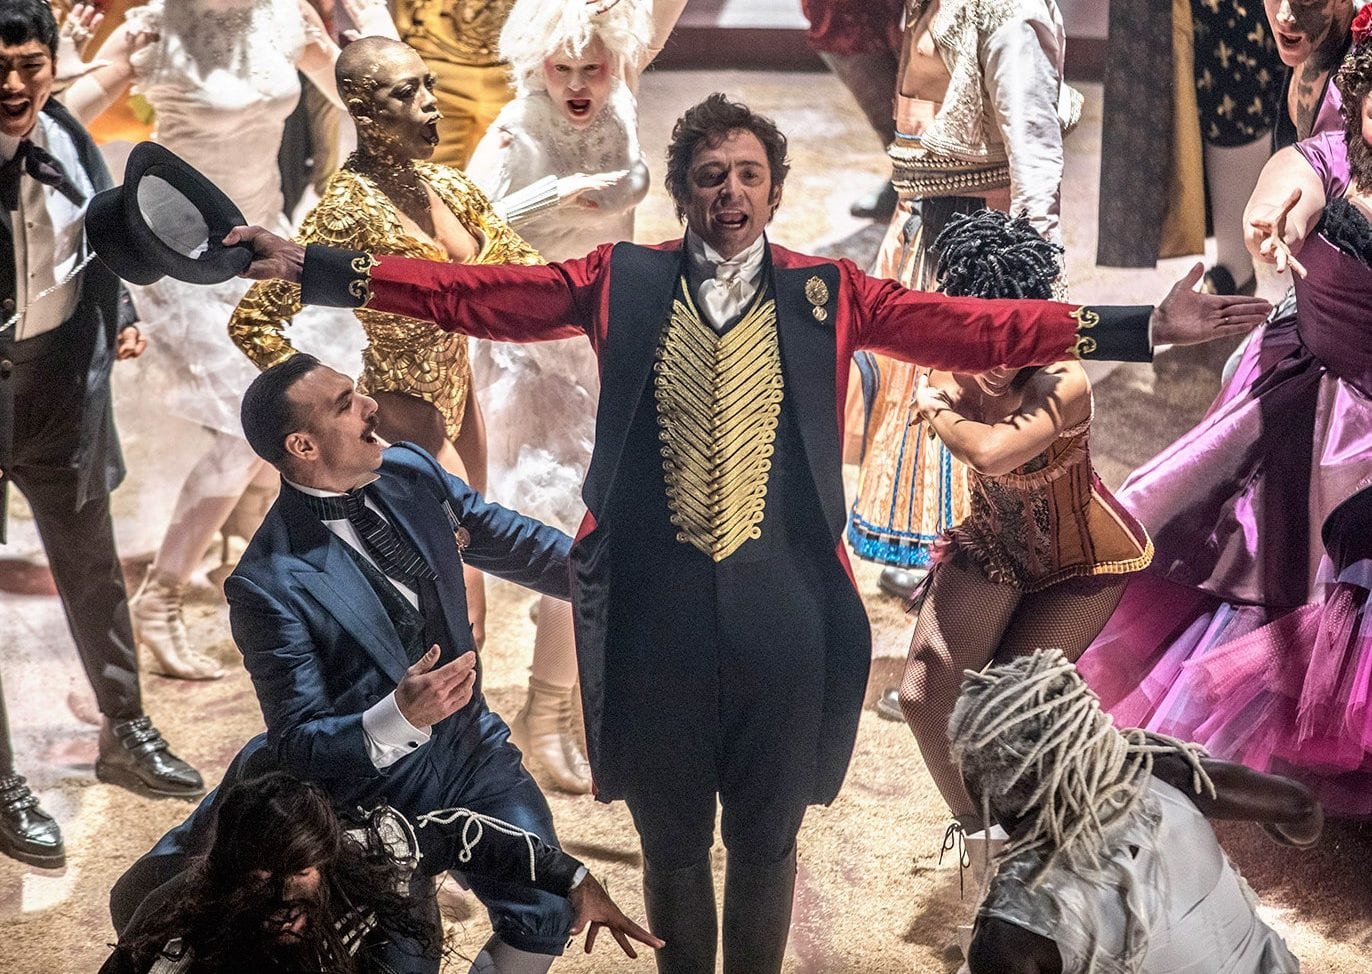 You can still grab tickets for the Greatest Showman &#8216;singing cinema&#8217; in Manchester next month, The Manc